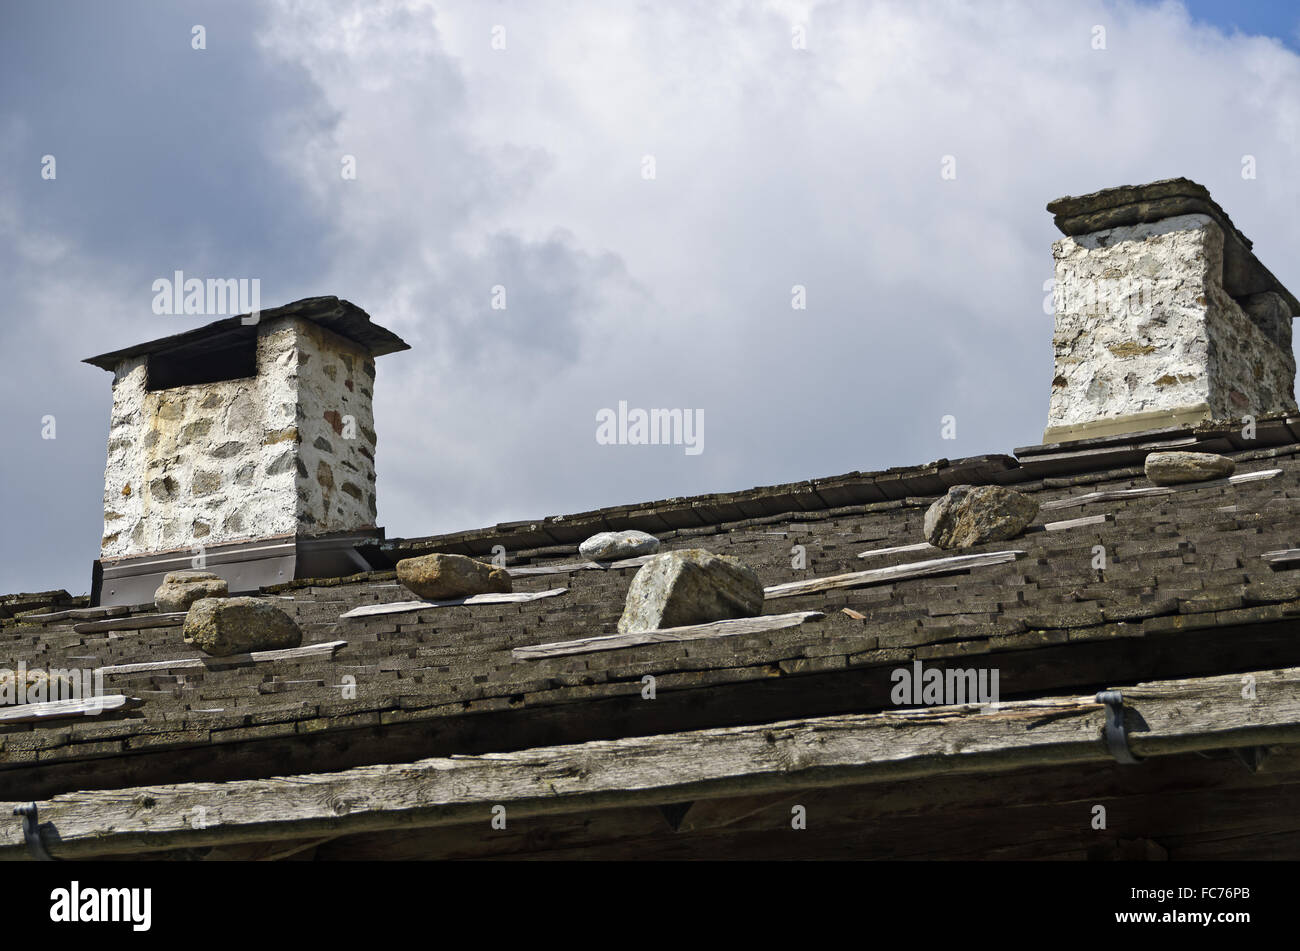 brick-built chimneys on a roof Stock Photo